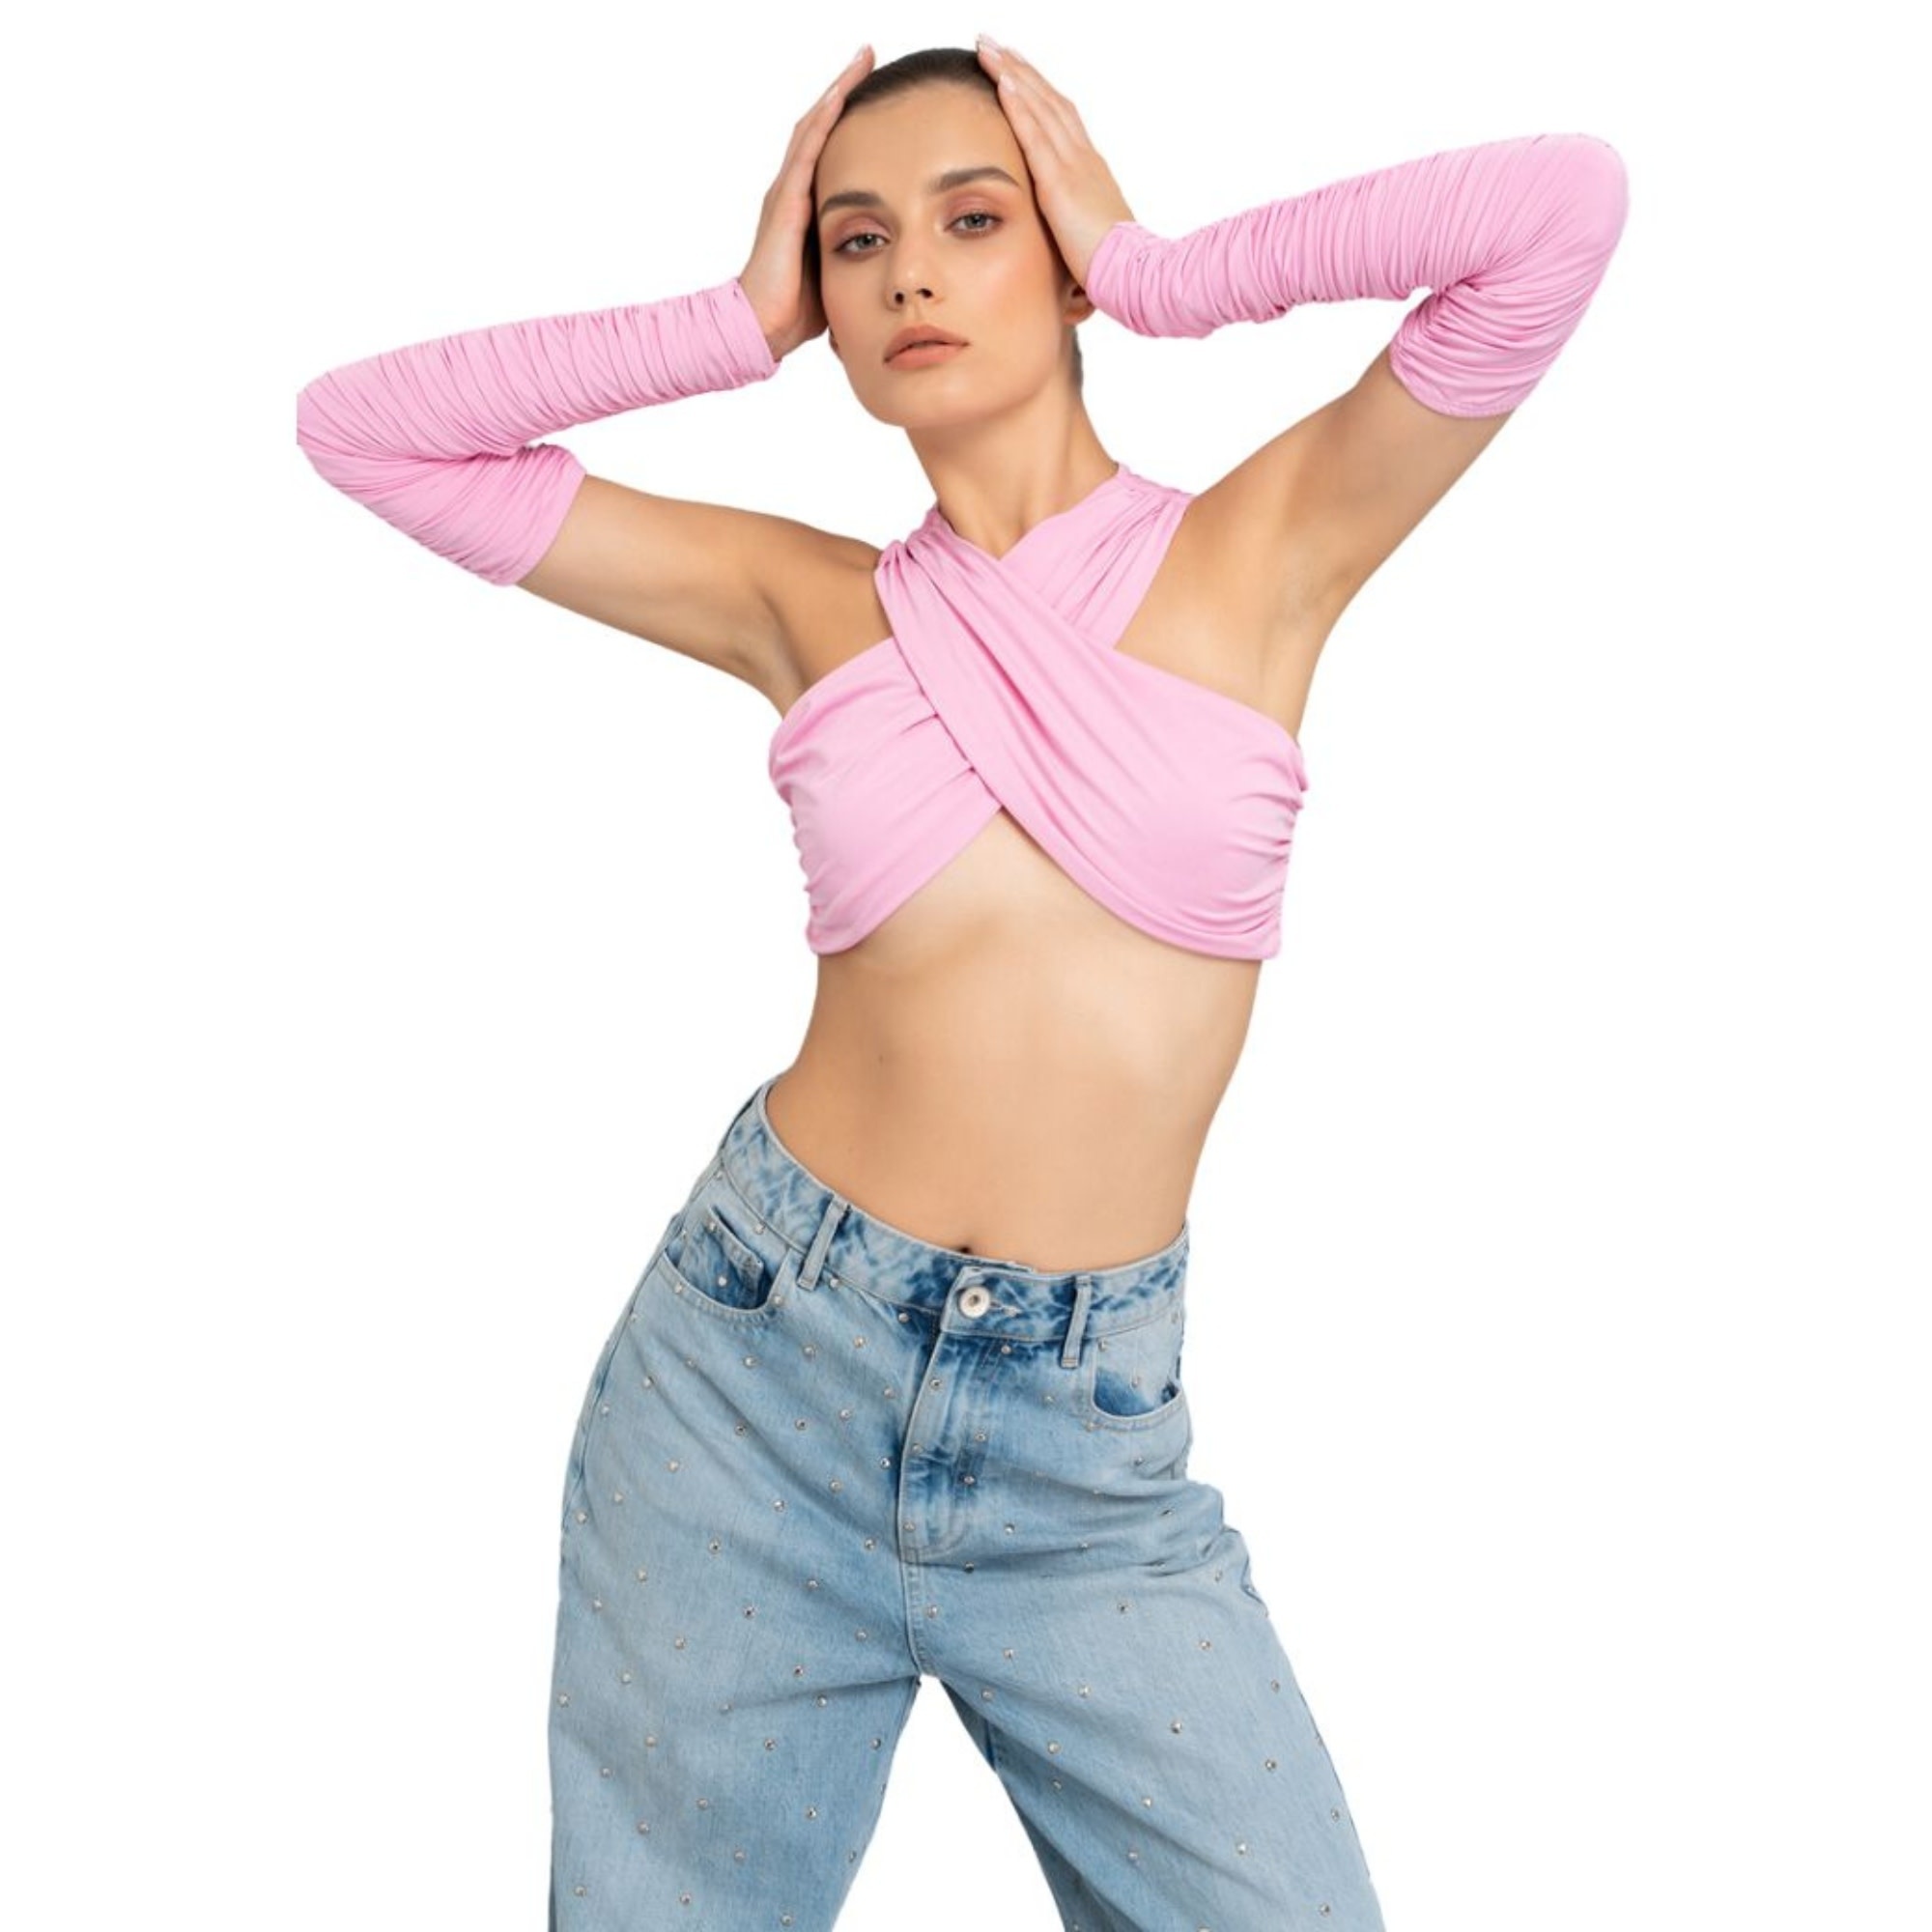 CRTBLNCHSHP NEW PINK CROSS MINI TOP WITH GLOVES